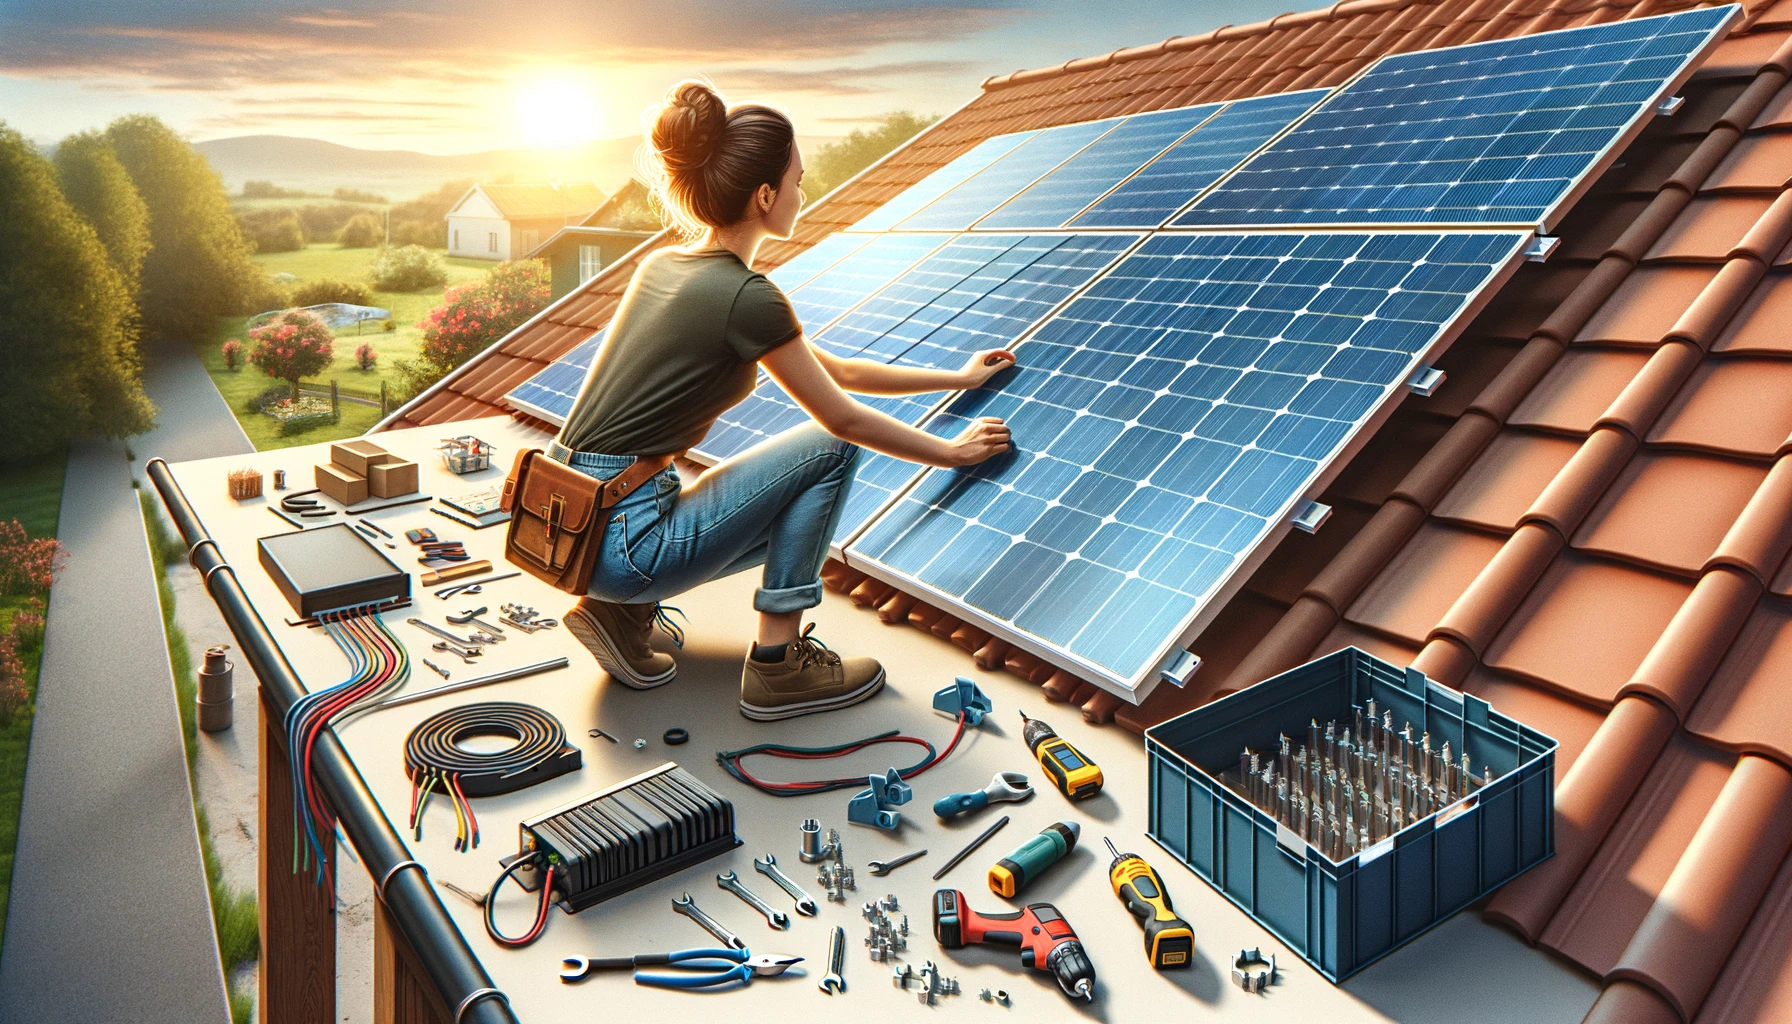 A woman installing solar panels on a roof or in an open area